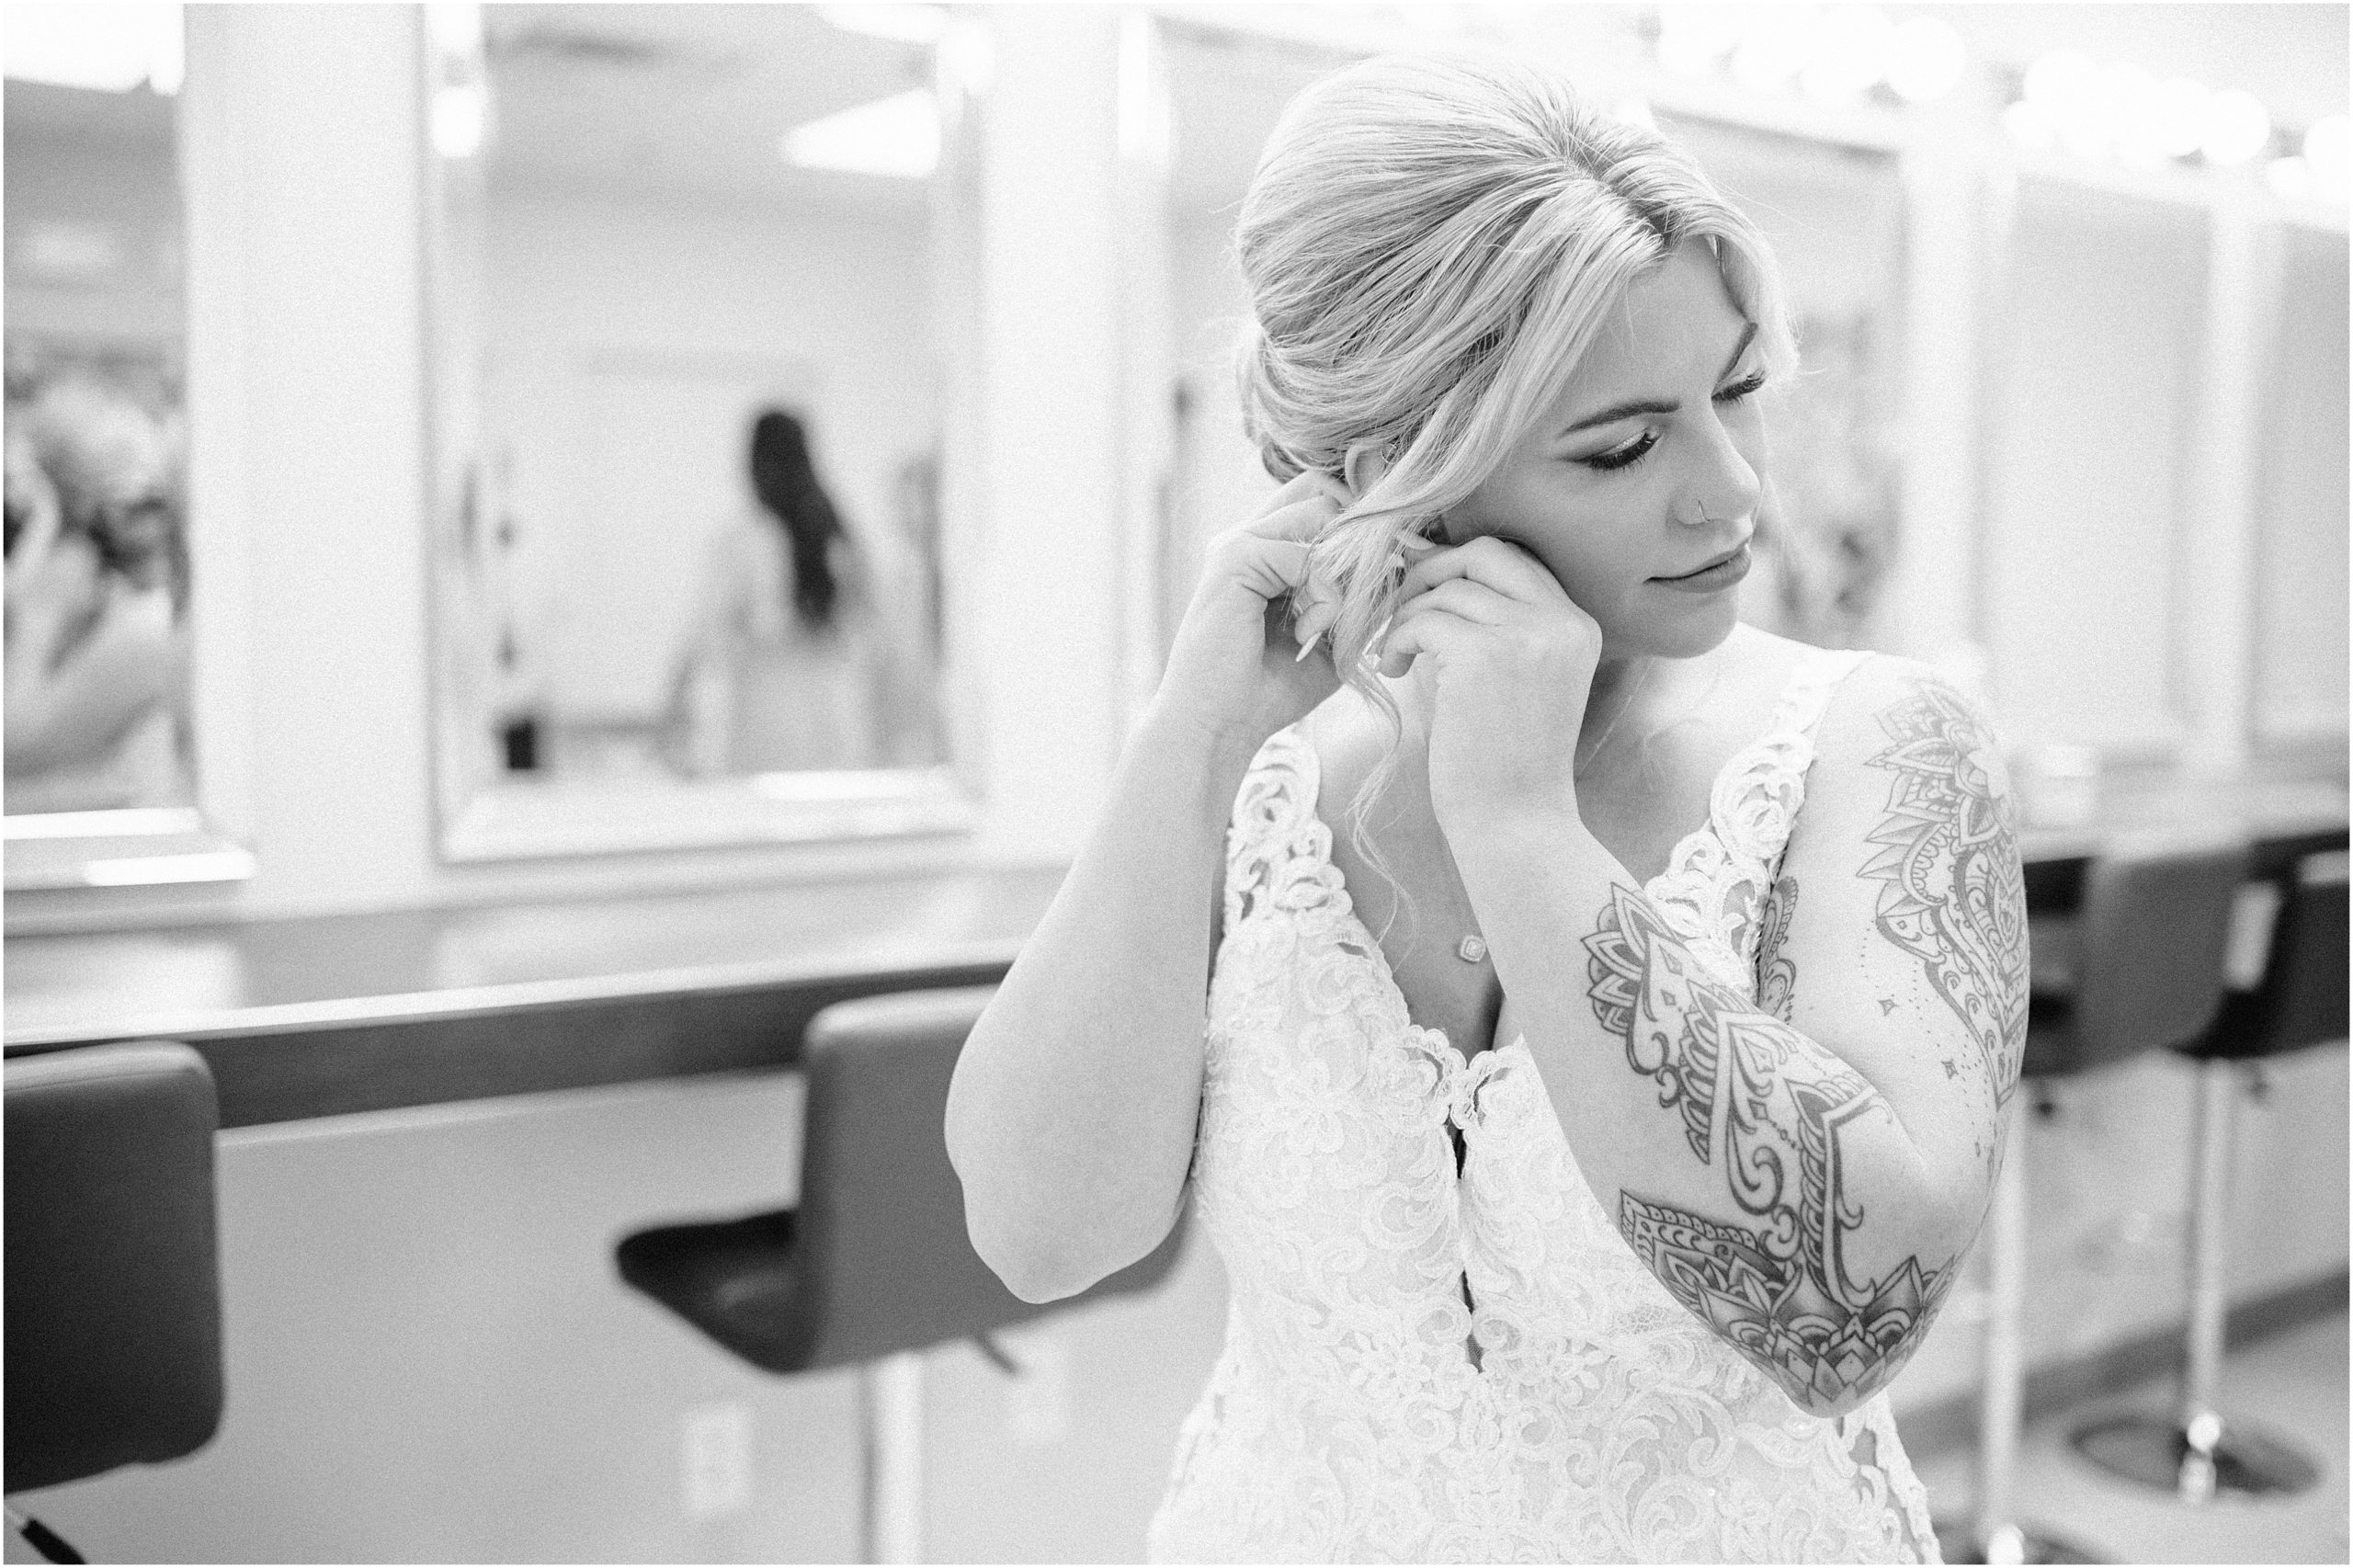 Black and white photo of bride putting on her earrings. Bride is wearing a sparkly, lace gown with a deep plunging neckline and has a sleeve of tatoos. Omaha Wedding Venue the Soiree Room taken by Anna Brace who specializes in Omaha Wedding Photography